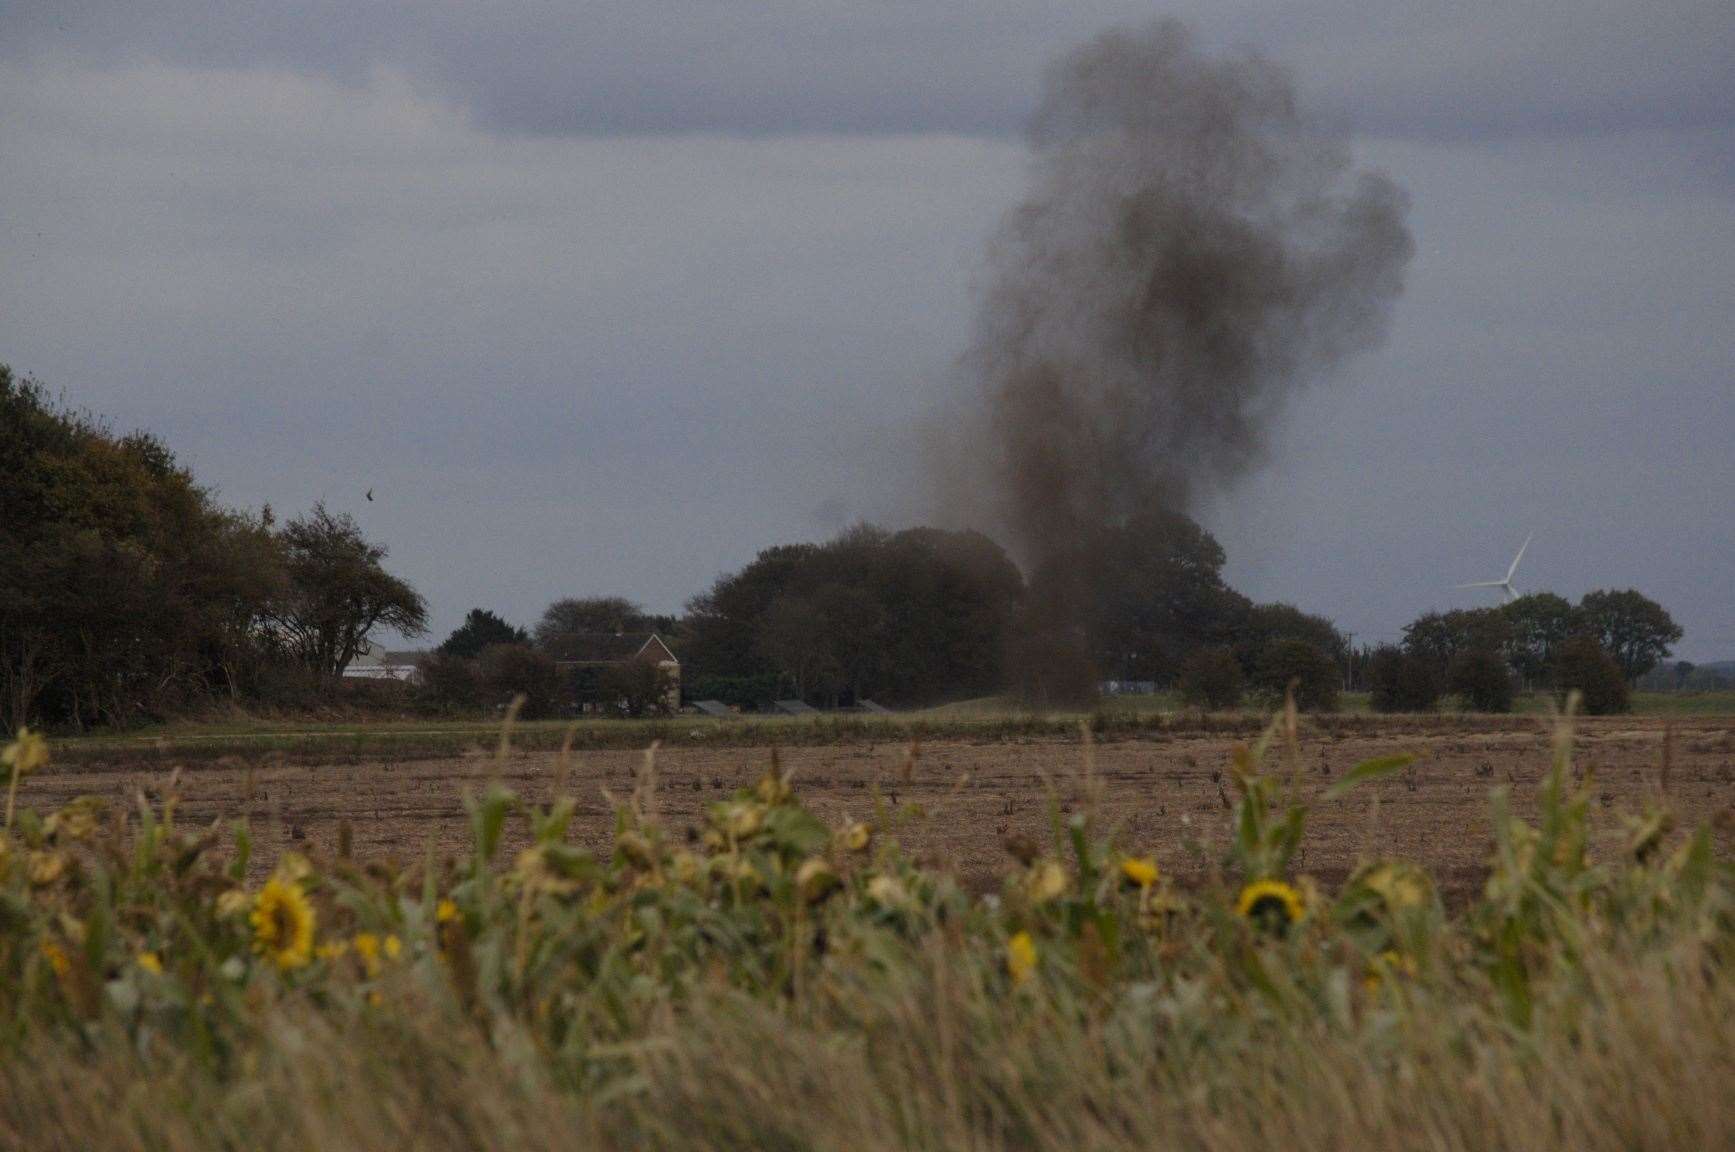 The noises sounded like controlled explosions, thought to be from the MOD site at Lydden. Library picture by Brian Scott